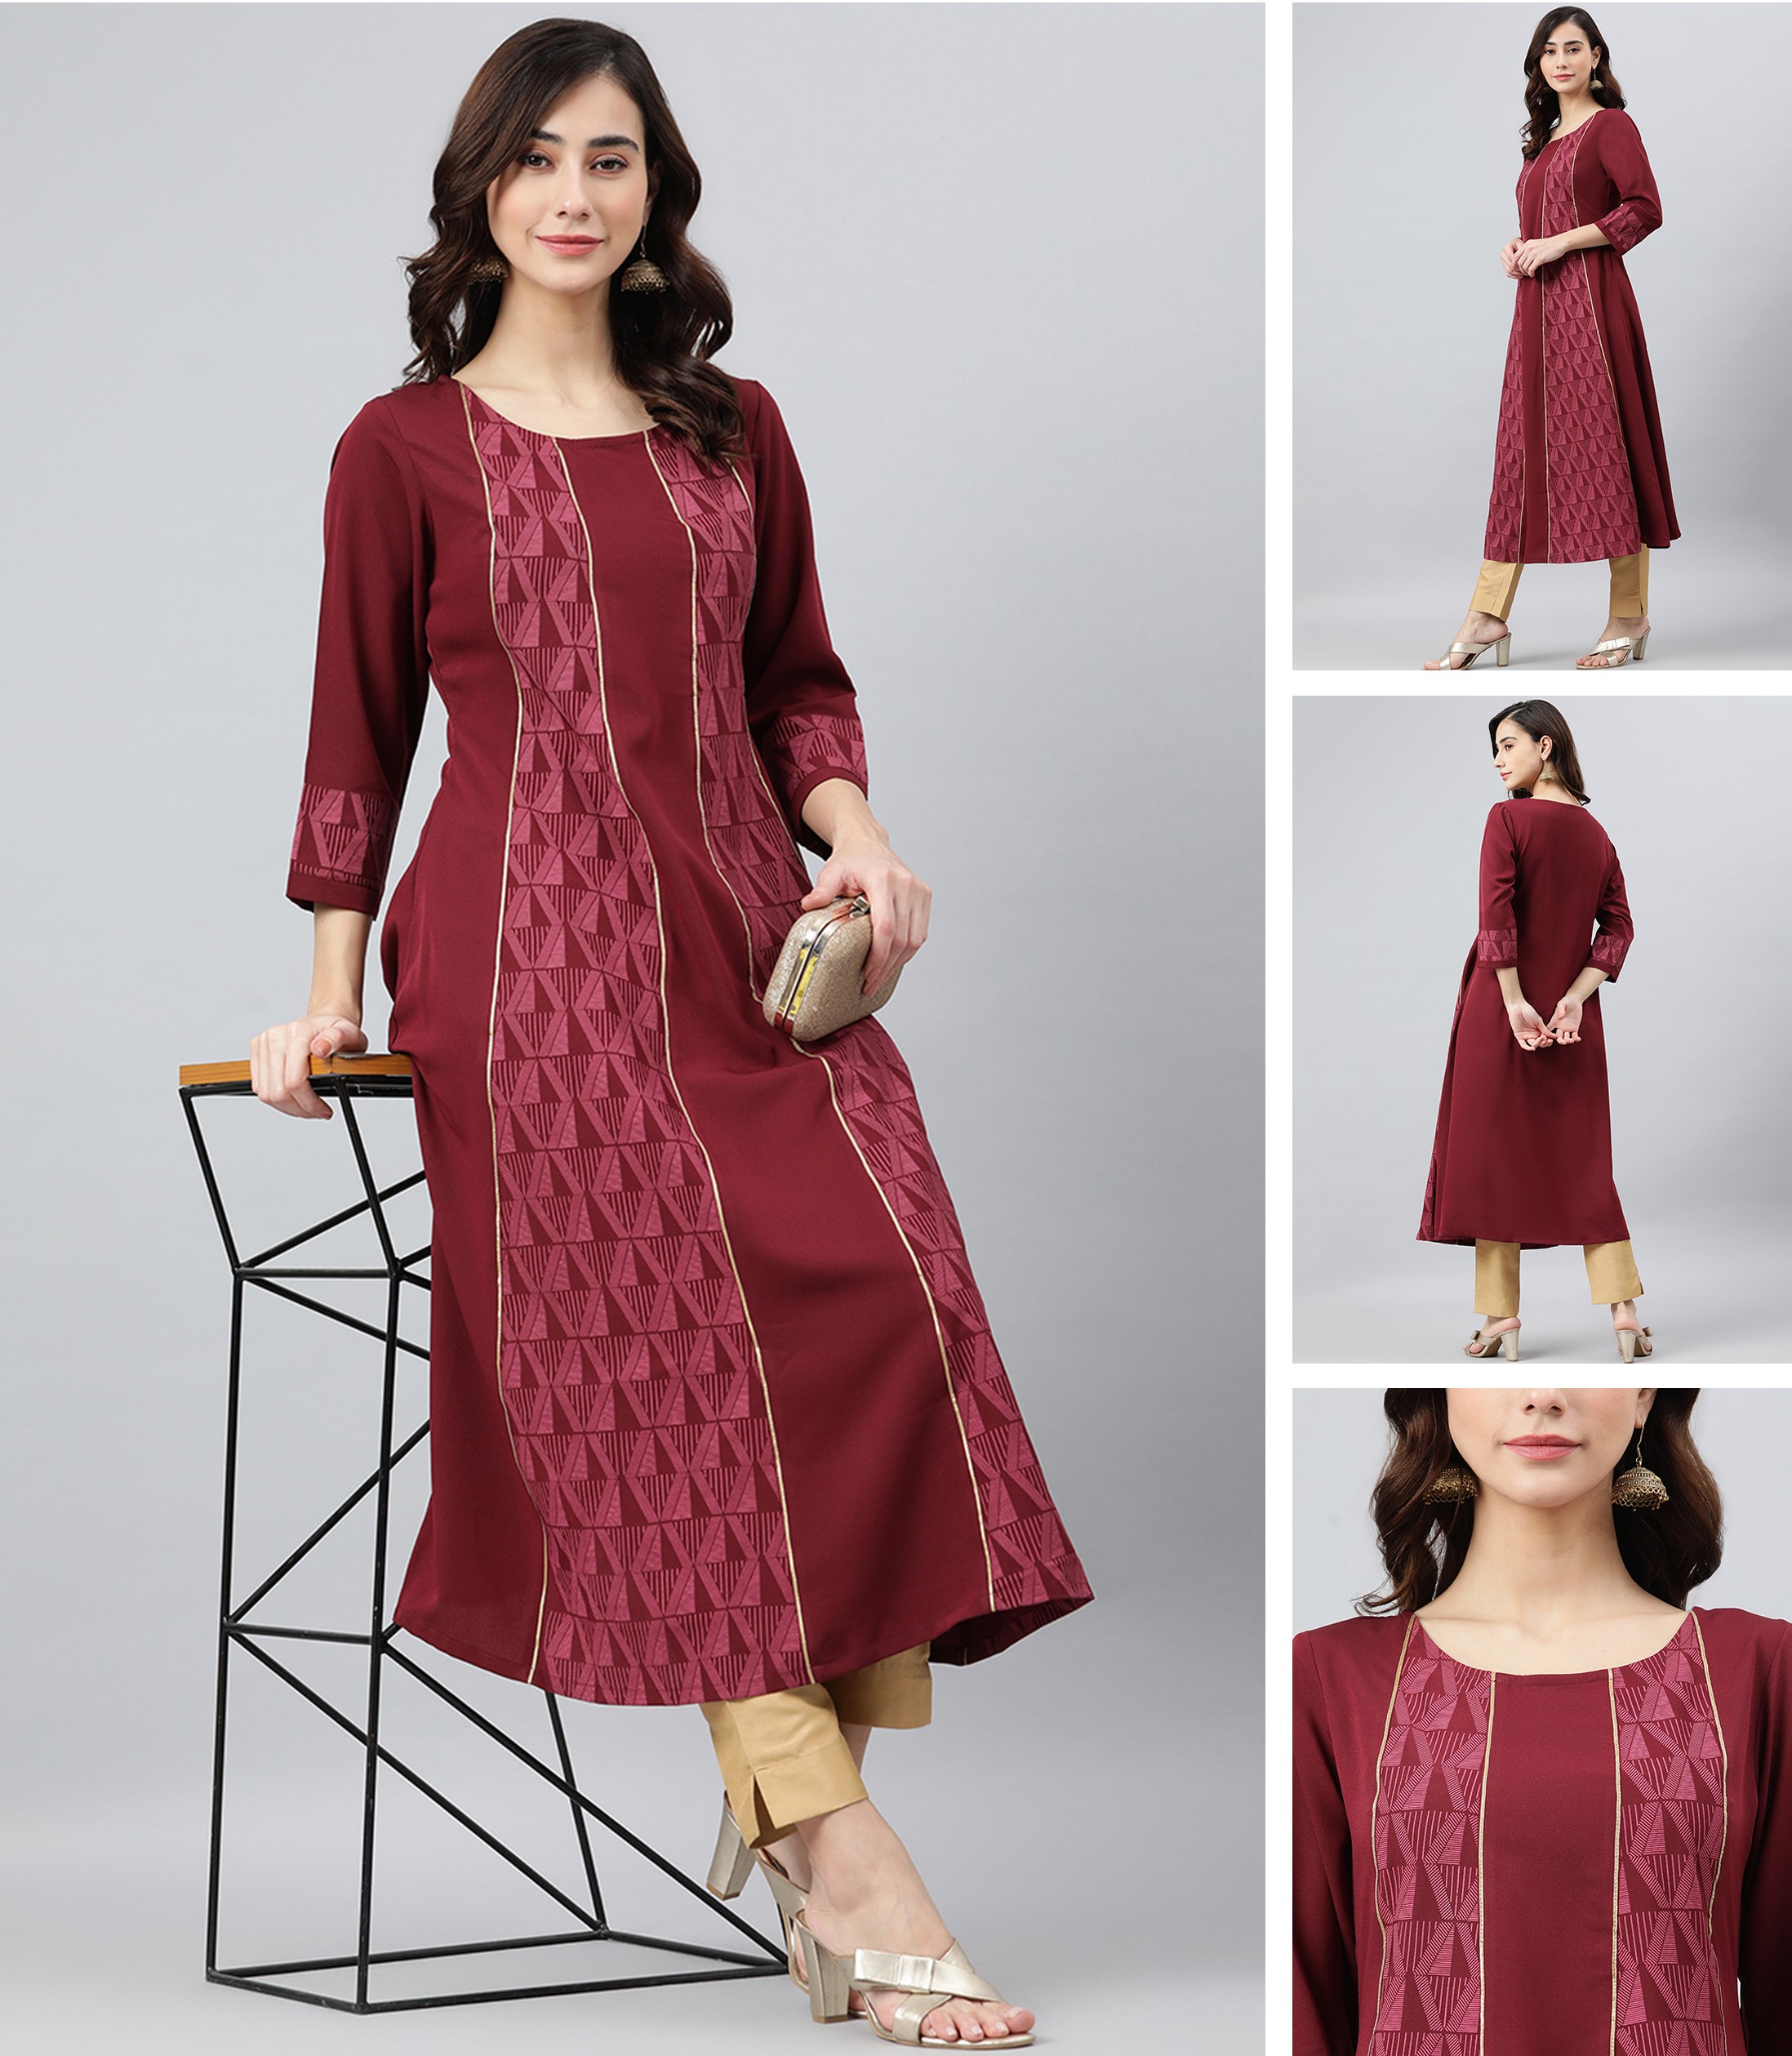 Maroon Colour Collar Neck Kurti Designs with Front Button